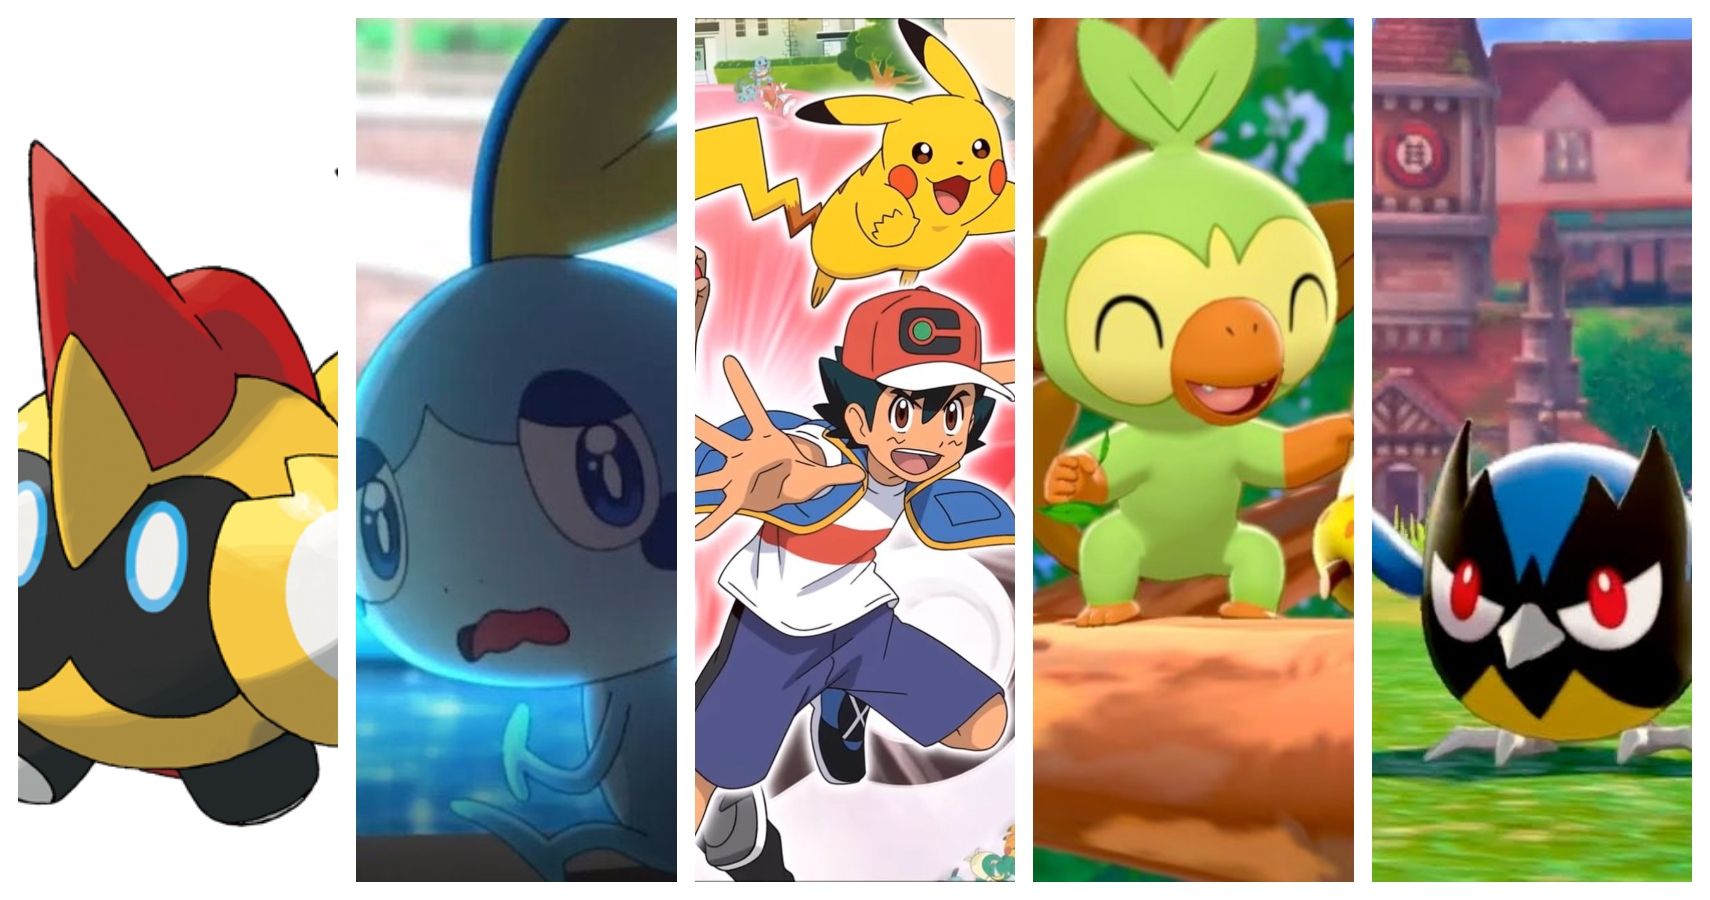 Pokemon Sword and Shield players can claim Ash's championship team thanks  to the anime